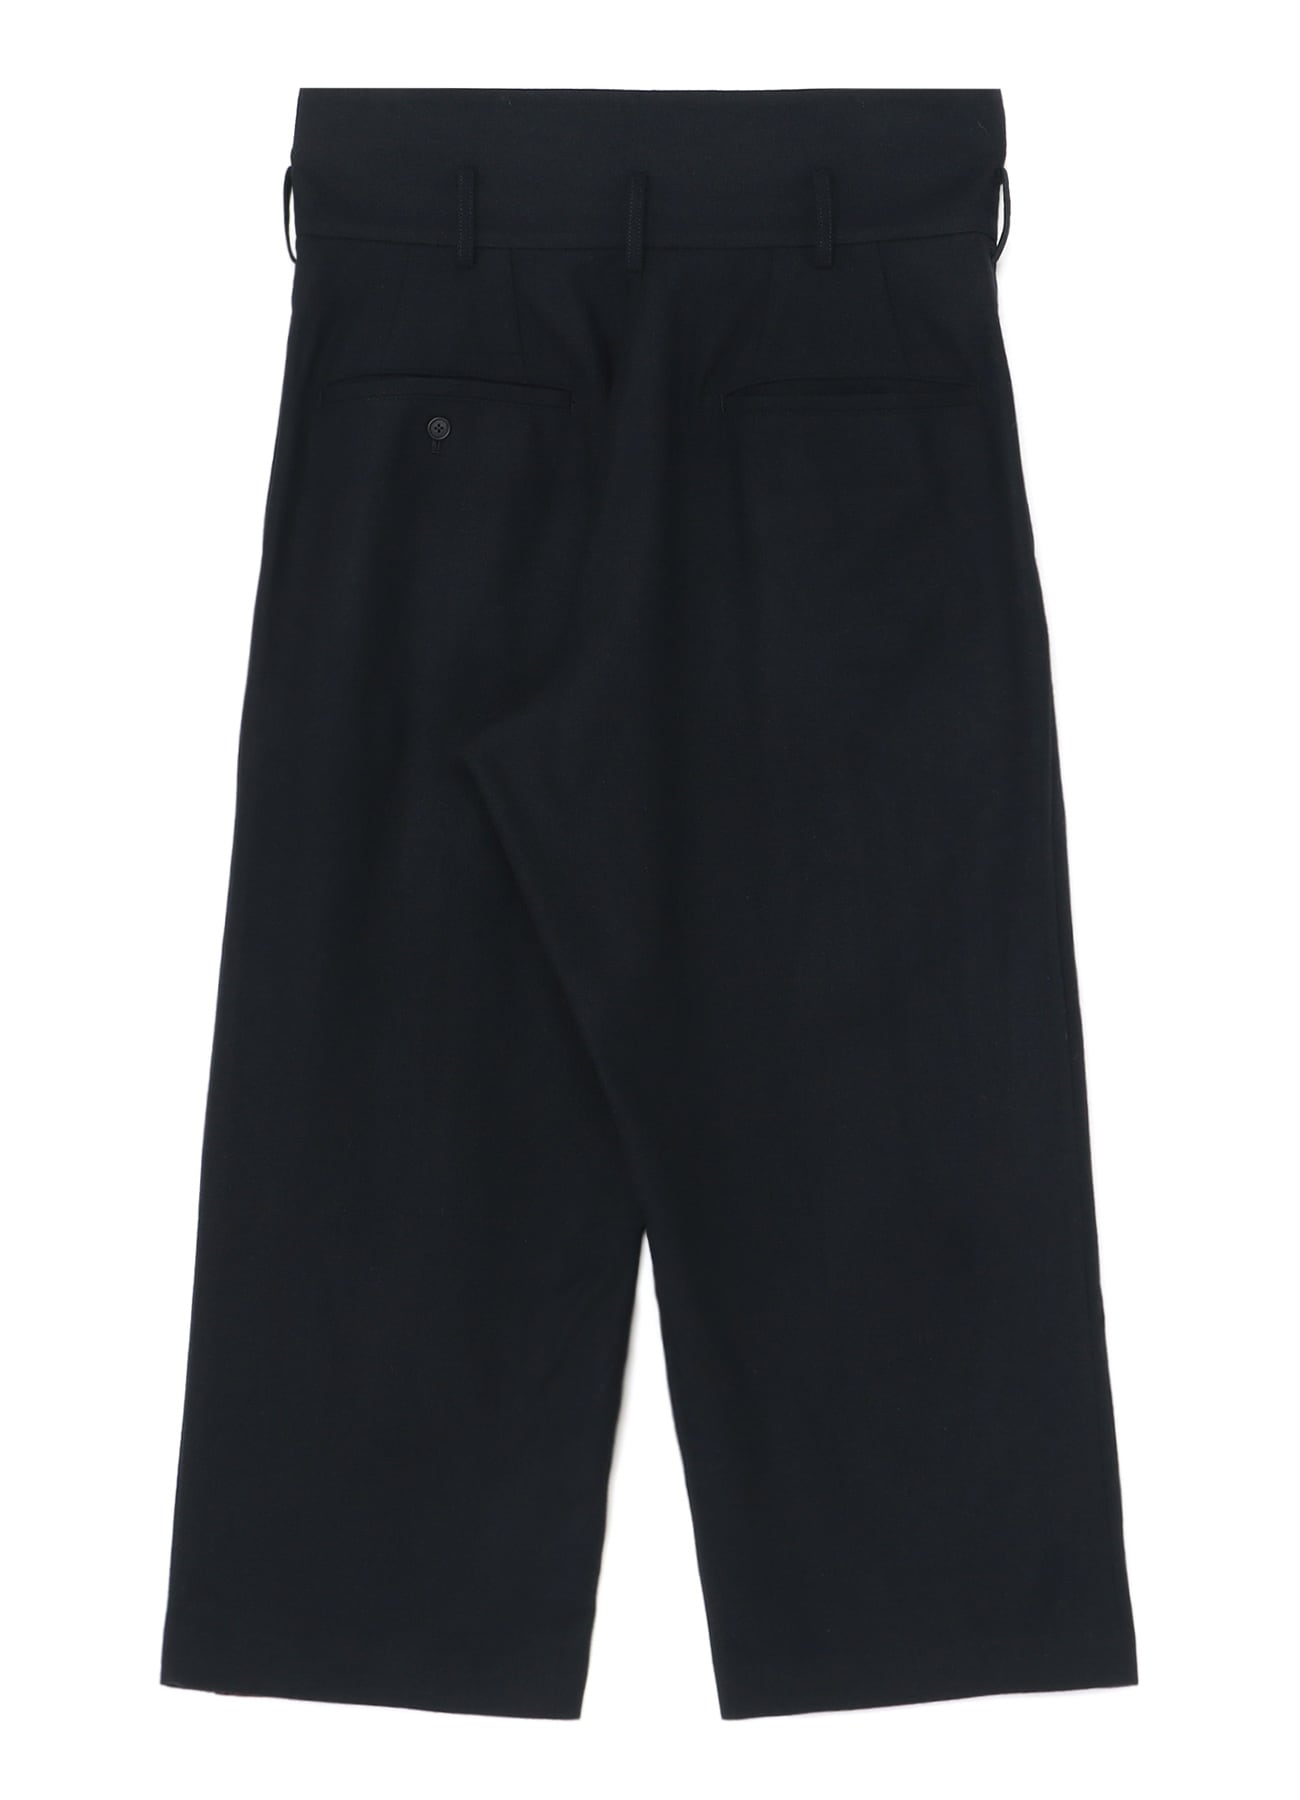 BLENDED ETERMINE FABRIC-SWITCHED DESIGN PANTS WITH HEM SLITS